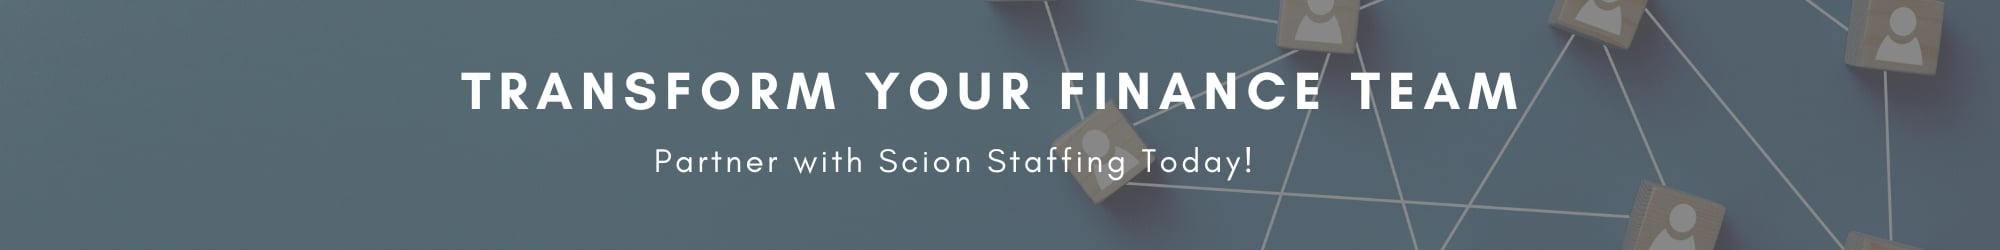 Transform your finance team with scion staffing